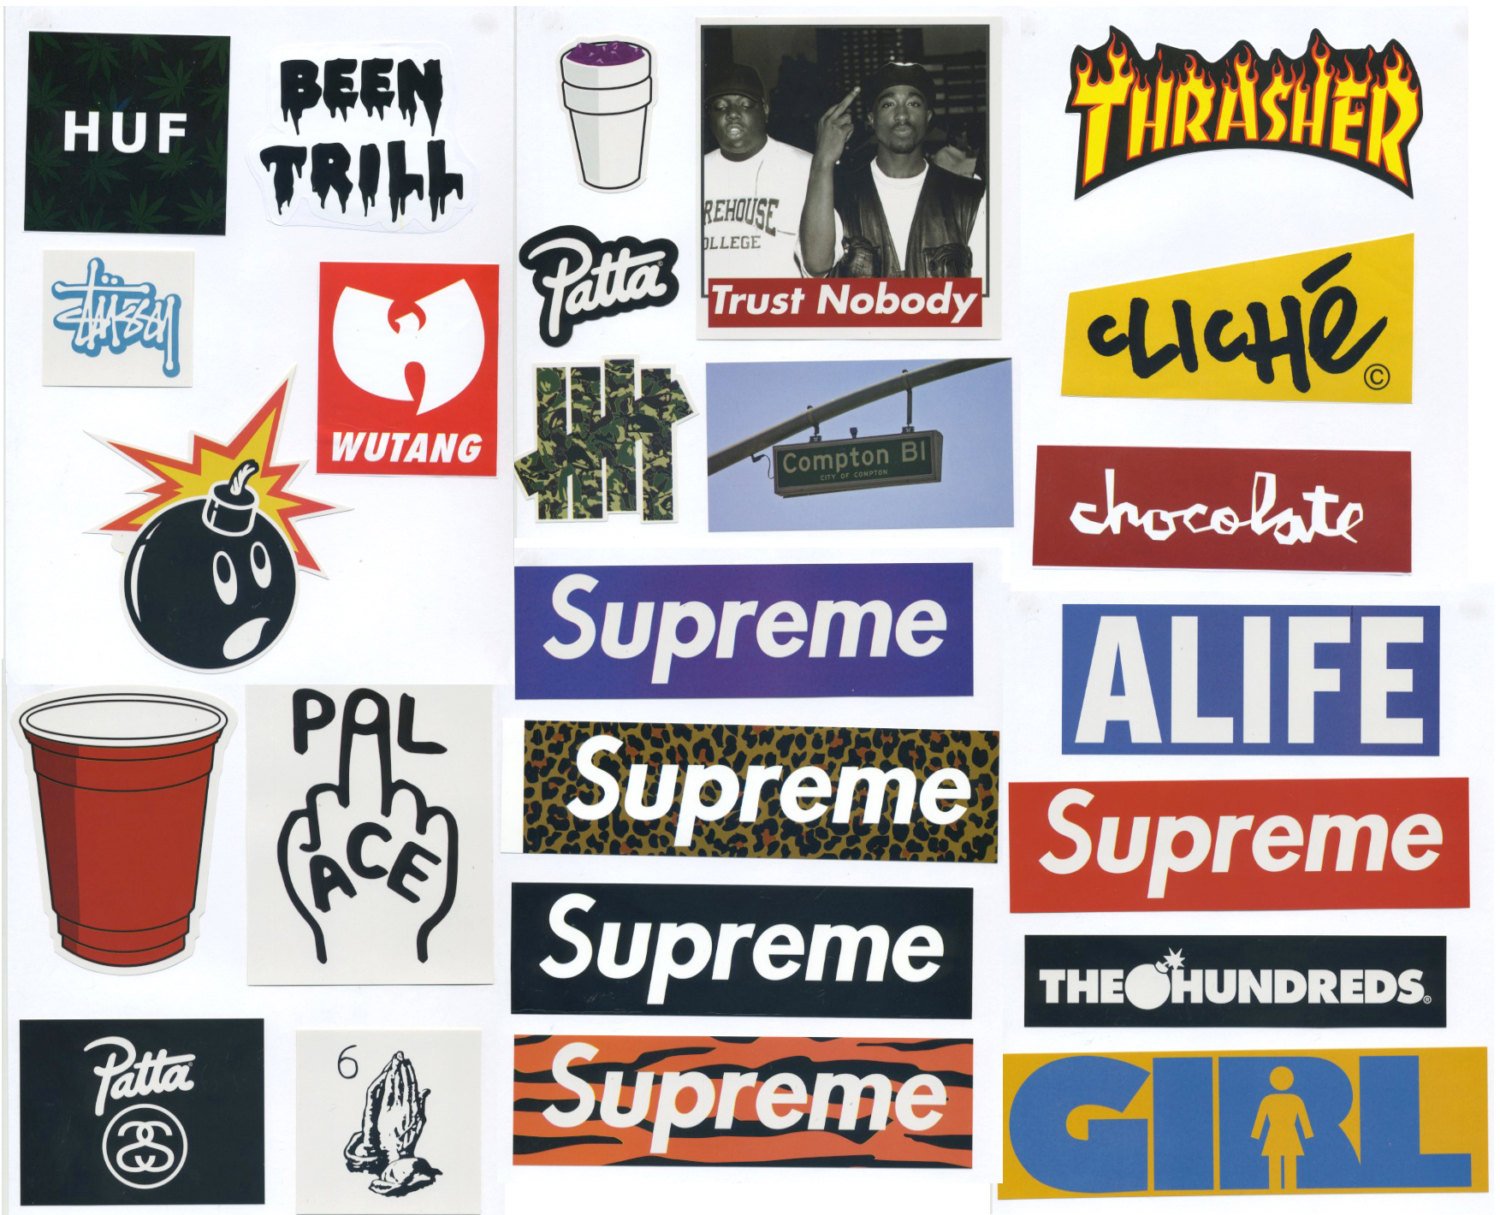 Supreme sticker 4 pack Will ship ASAP $10 each pack of 4